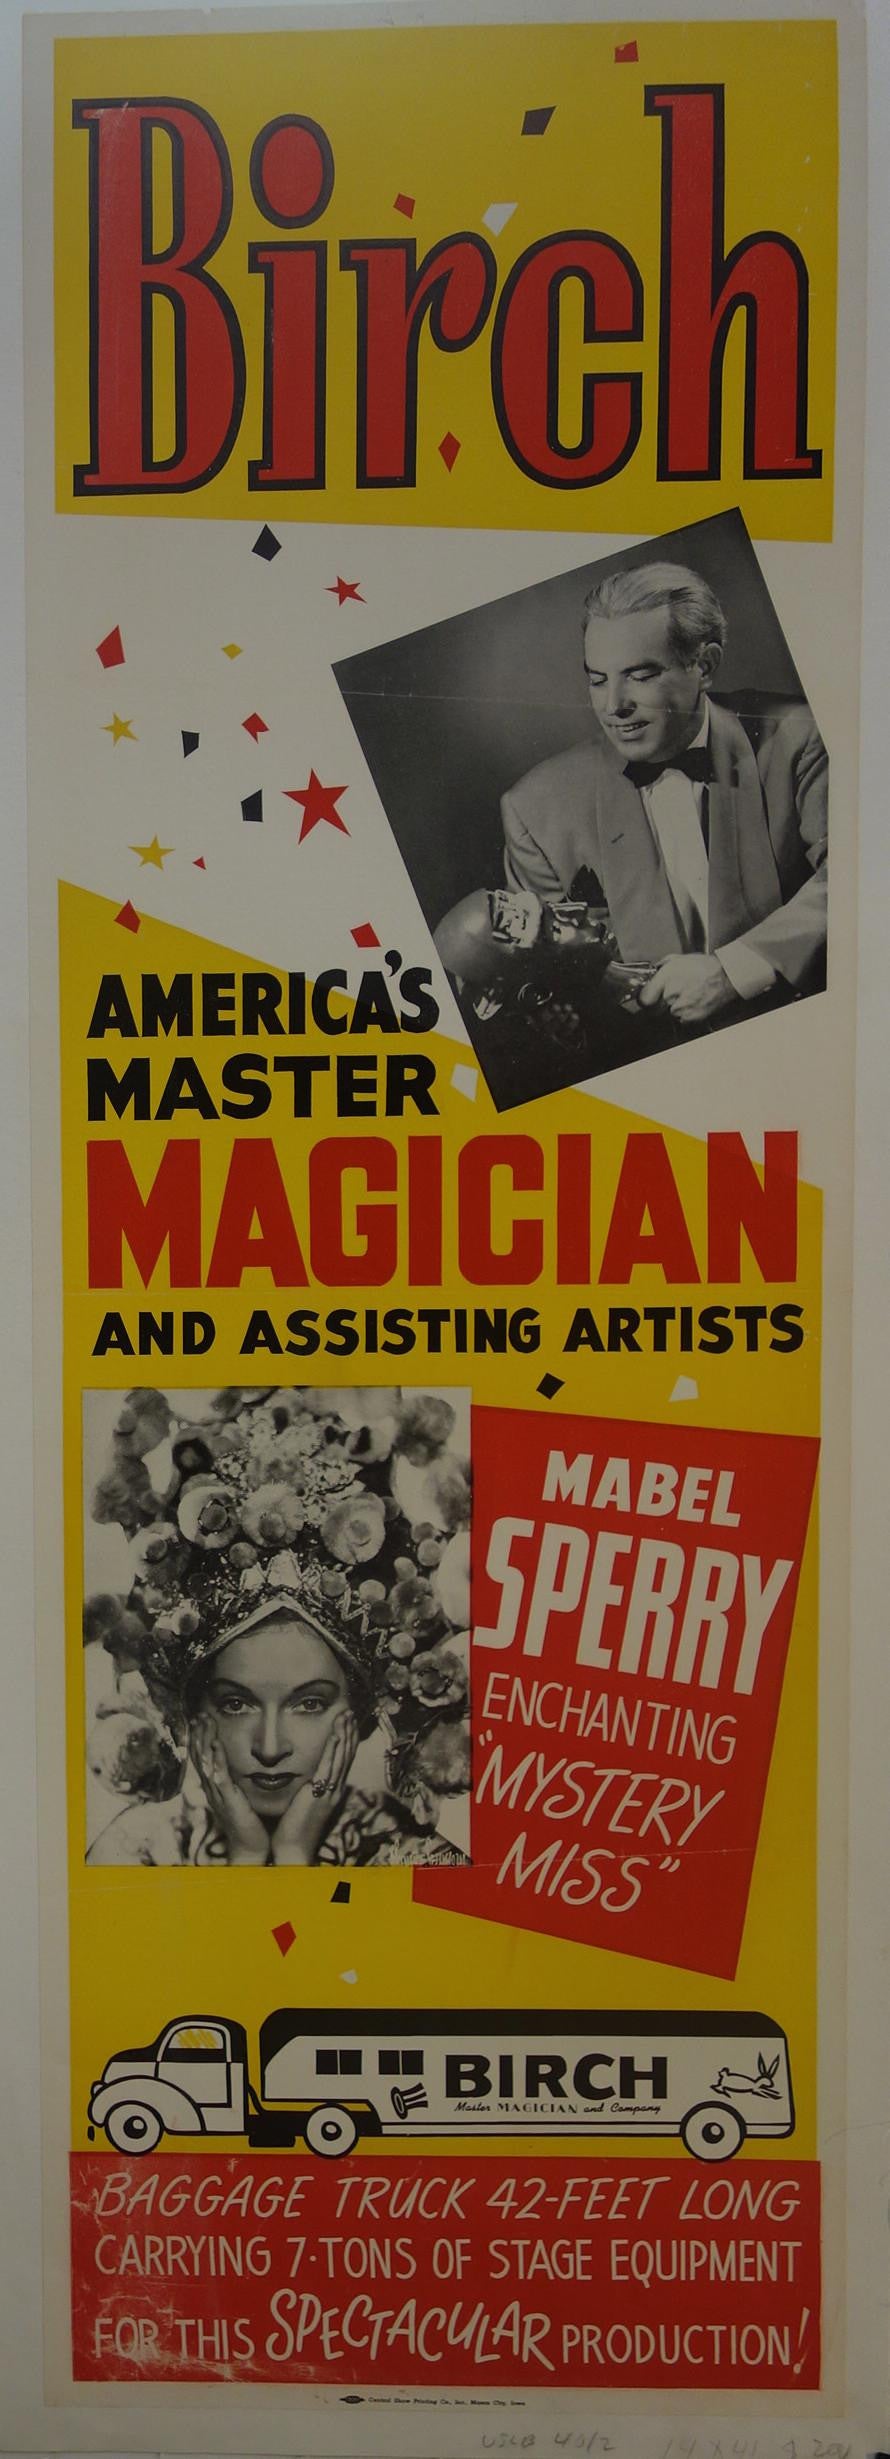 America's Master Magician -Magic at it's best BIRCH & Mabel Sperry